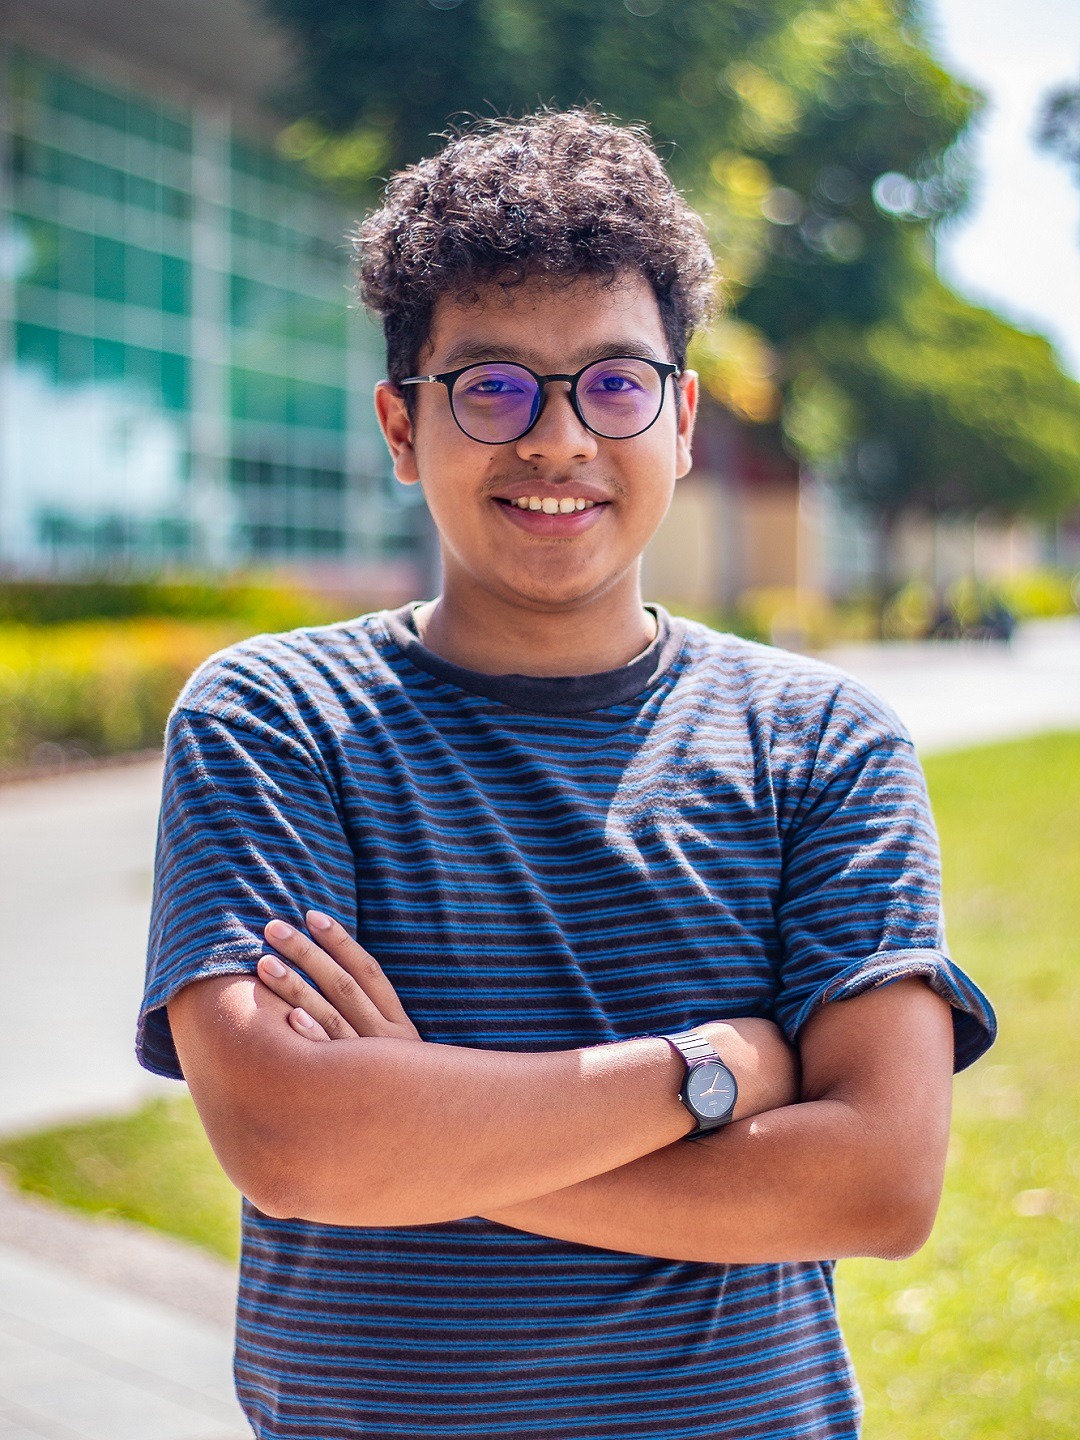 “From a very young age, I have been exposed to entrepreneurship but I didn’t really have any interest in it until recently. It started with the Startup Weekend Miri 2017, a hackathon held over a weekend all around the world. Although our team didn’t...